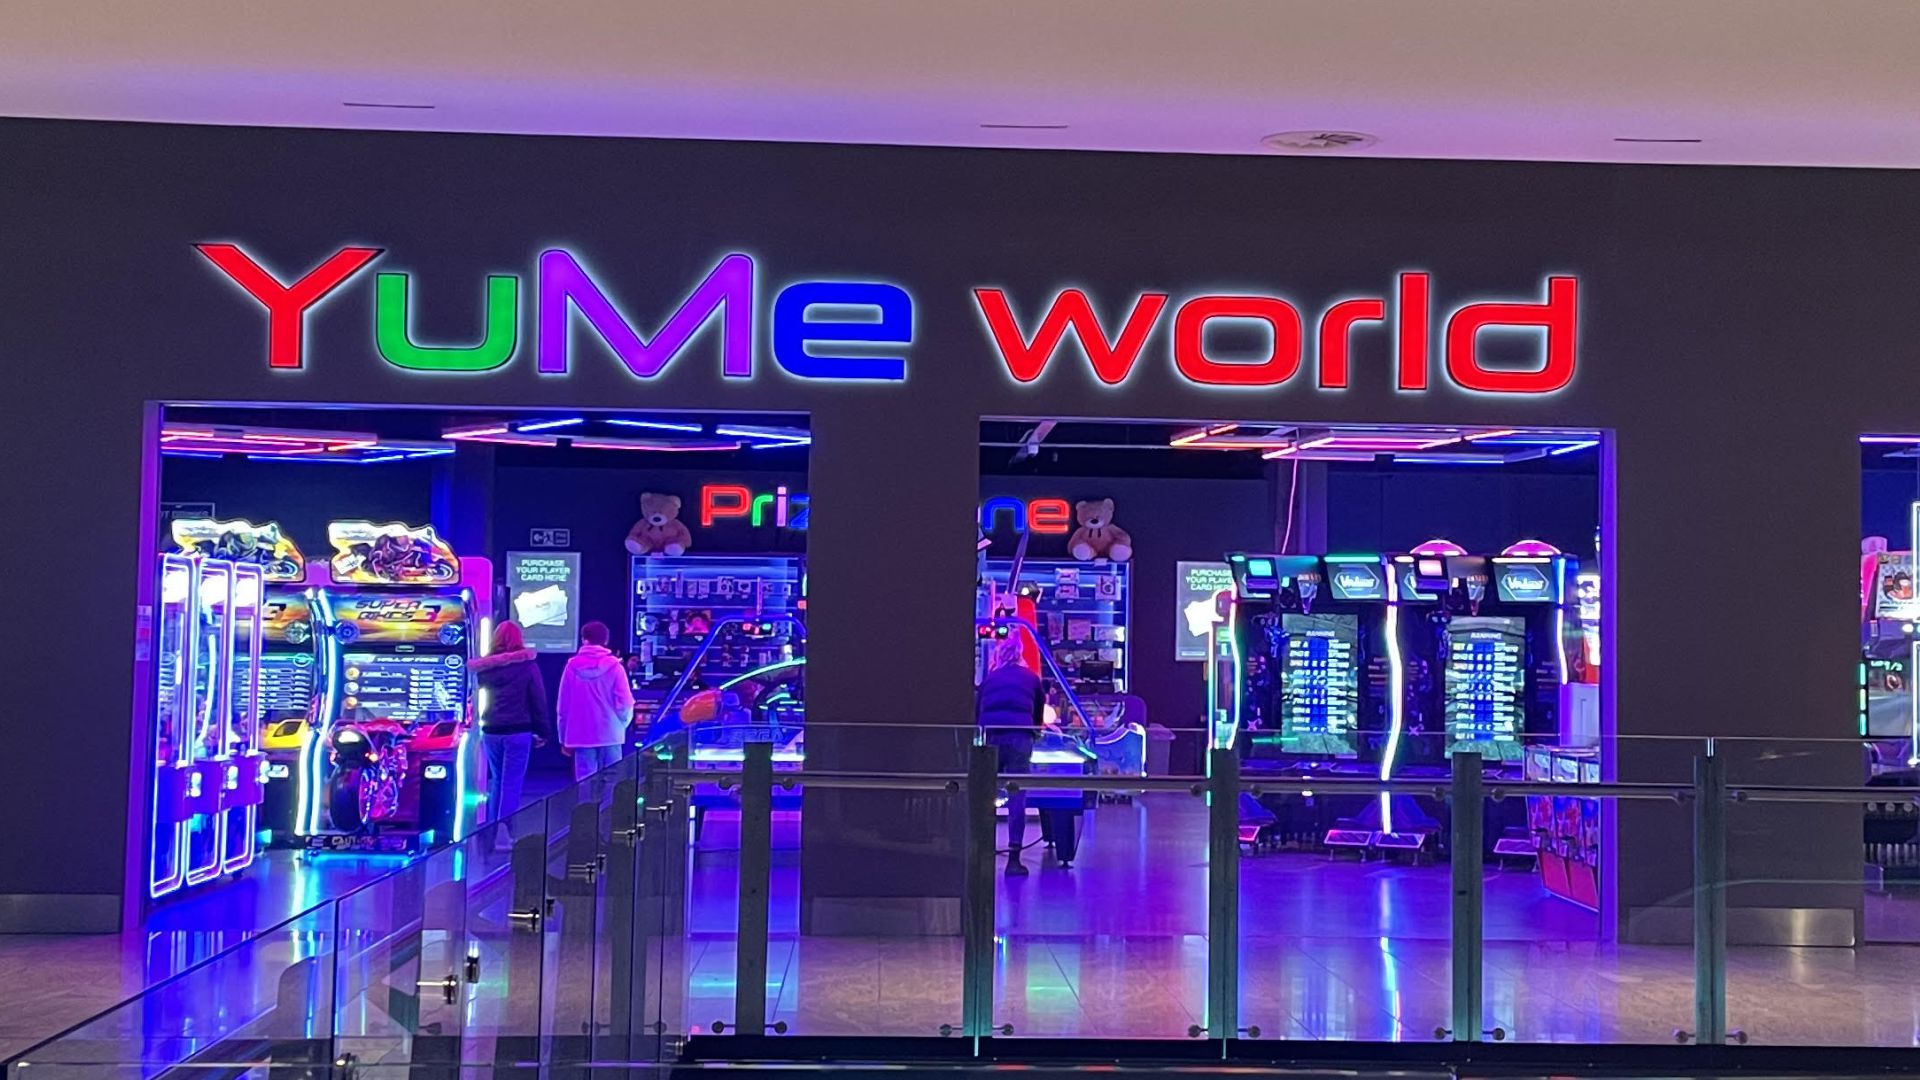 Discover fun things at yume world Newcastle Our Centre